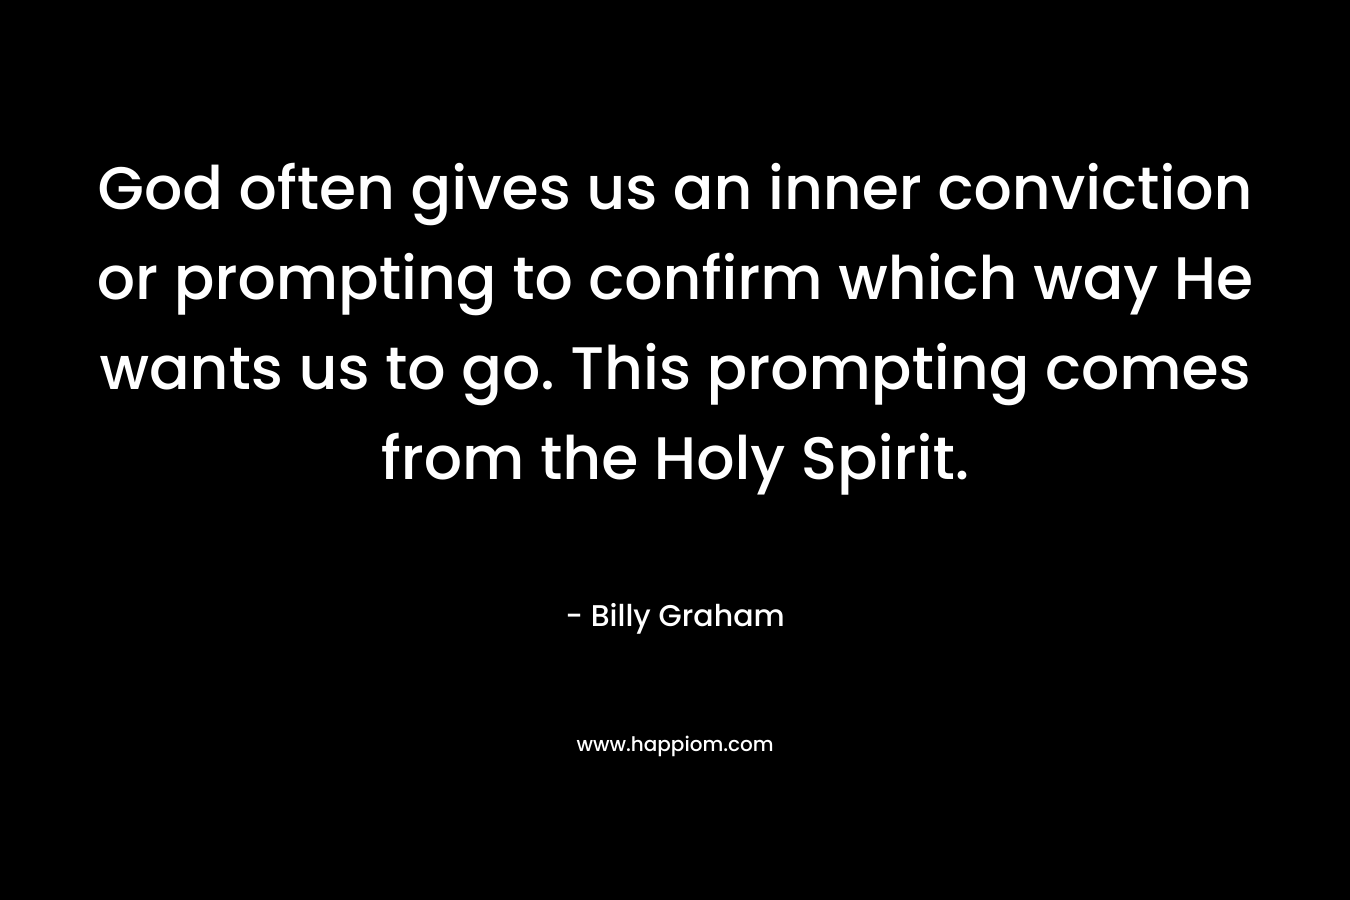 God often gives us an inner conviction or prompting to confirm which way He wants us to go. This prompting comes from the Holy Spirit.